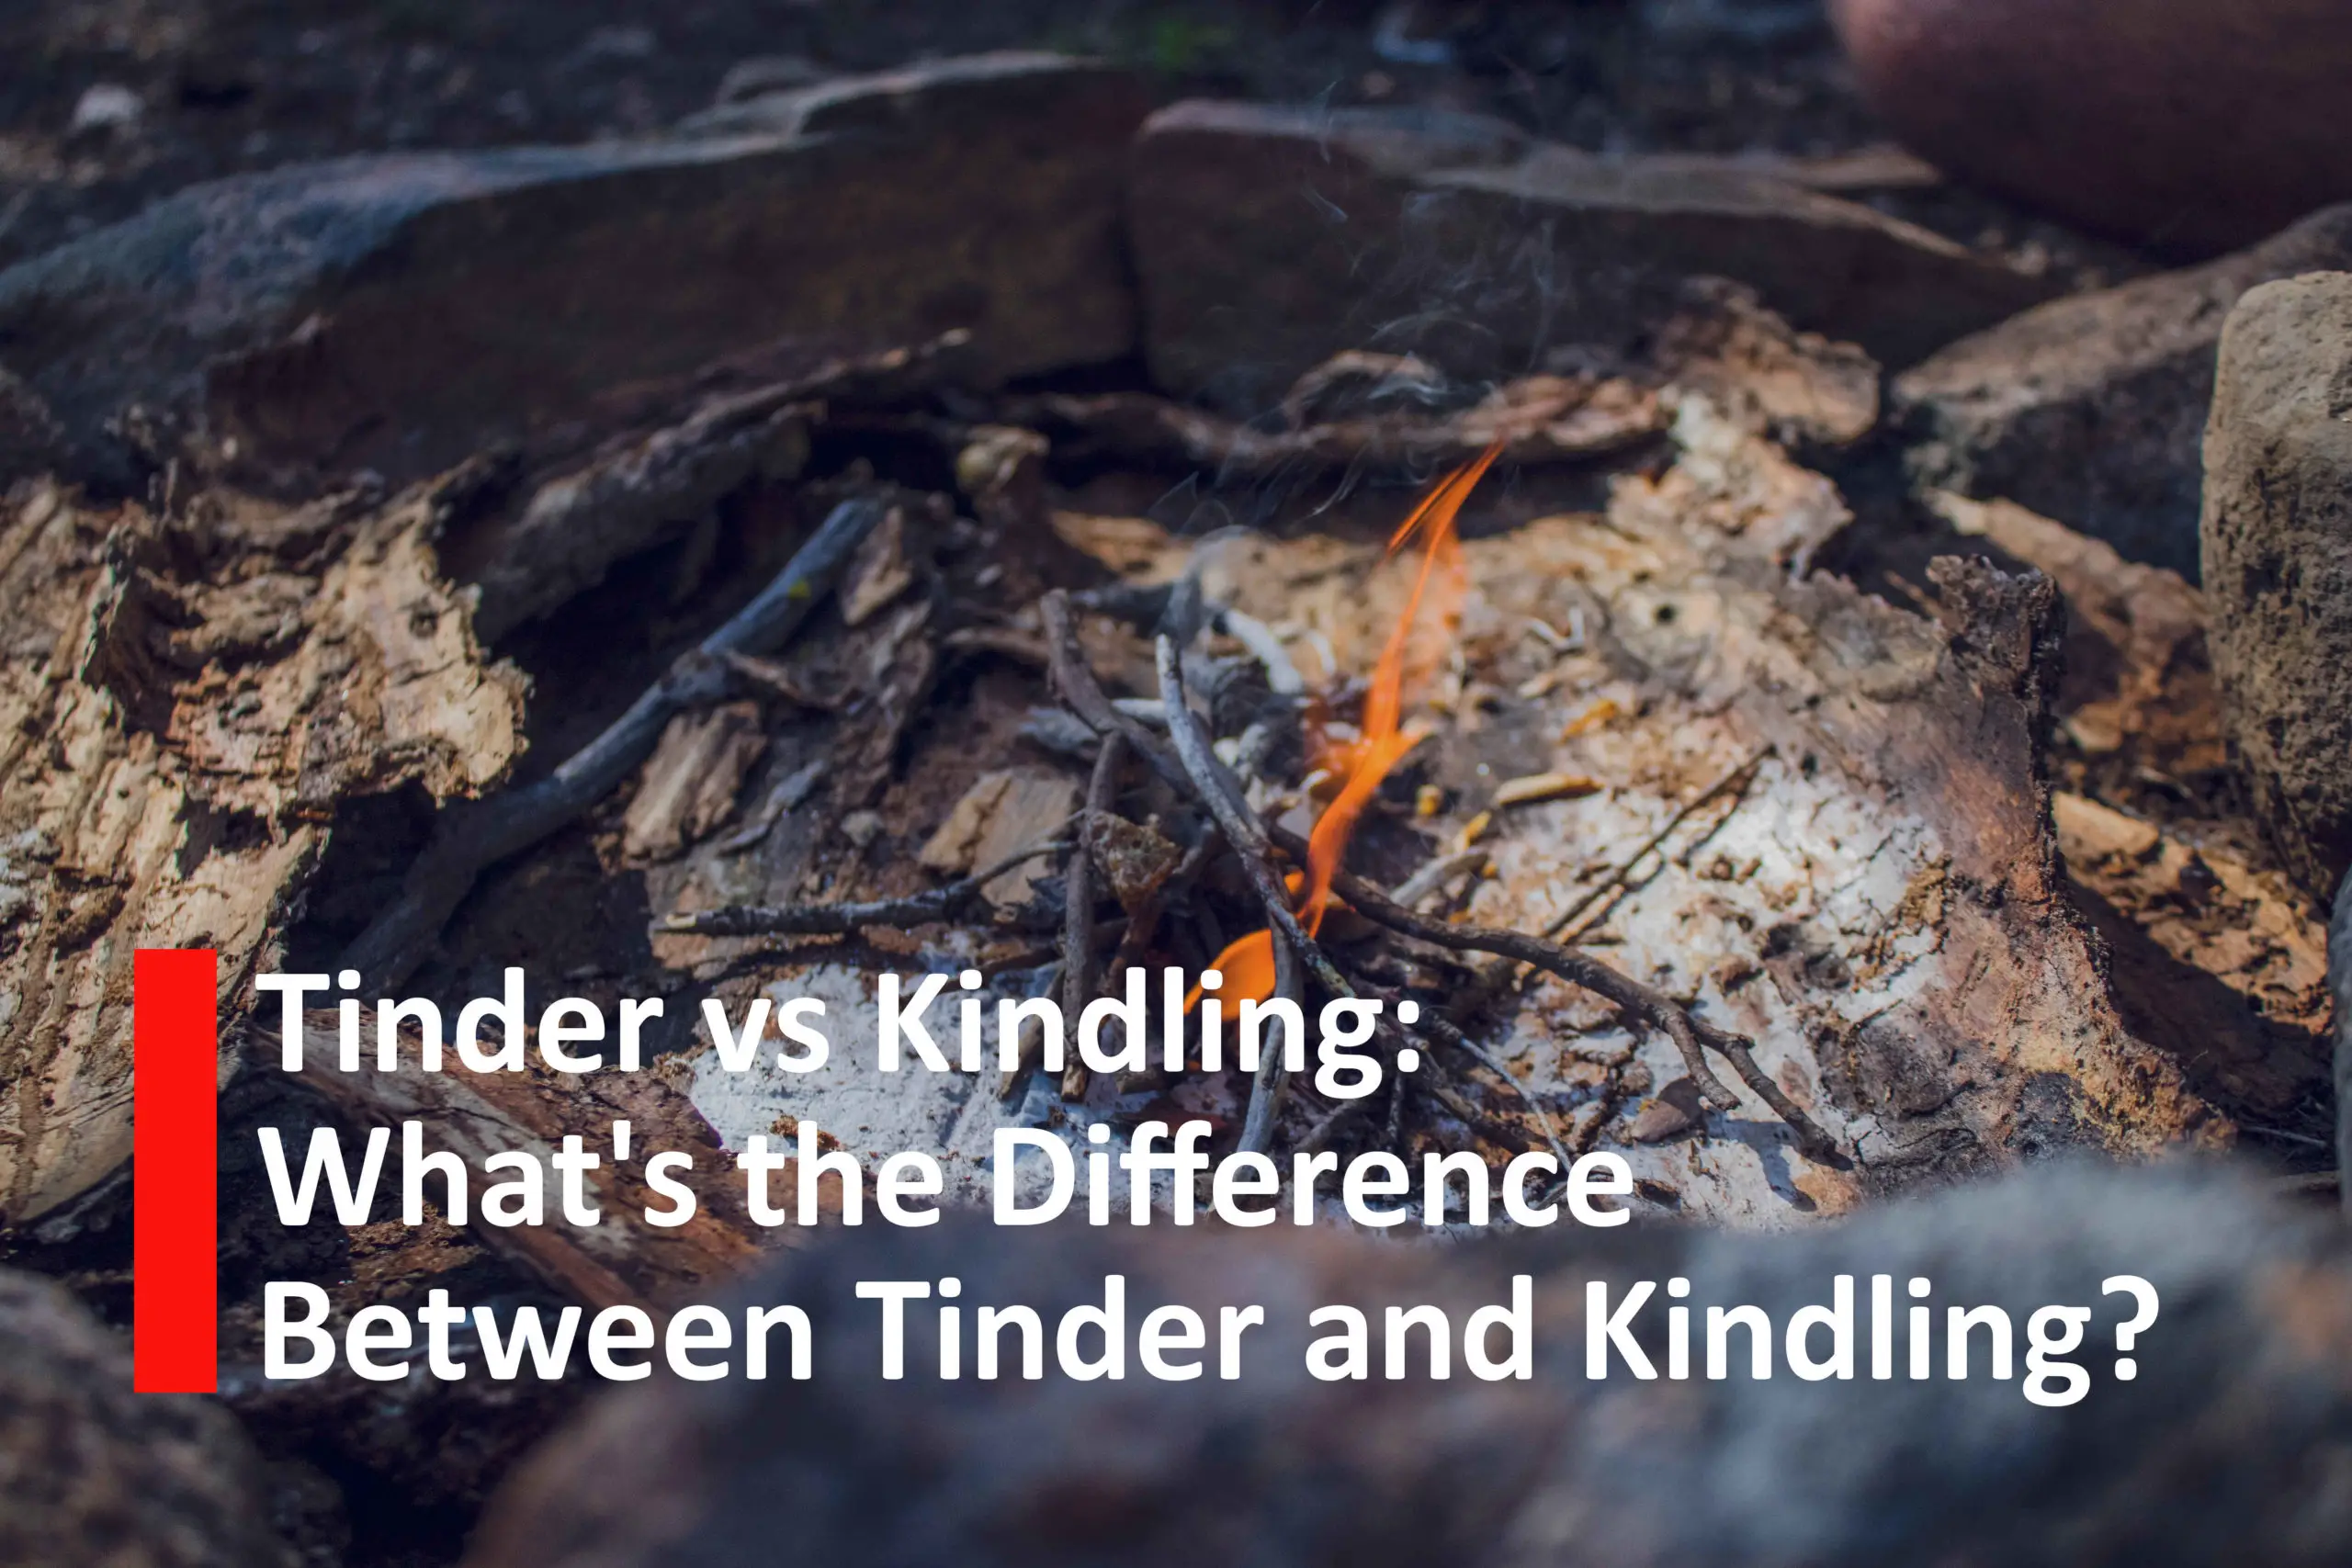 Tinder vs Kindling: What's the Difference Between Tinder and Kindling